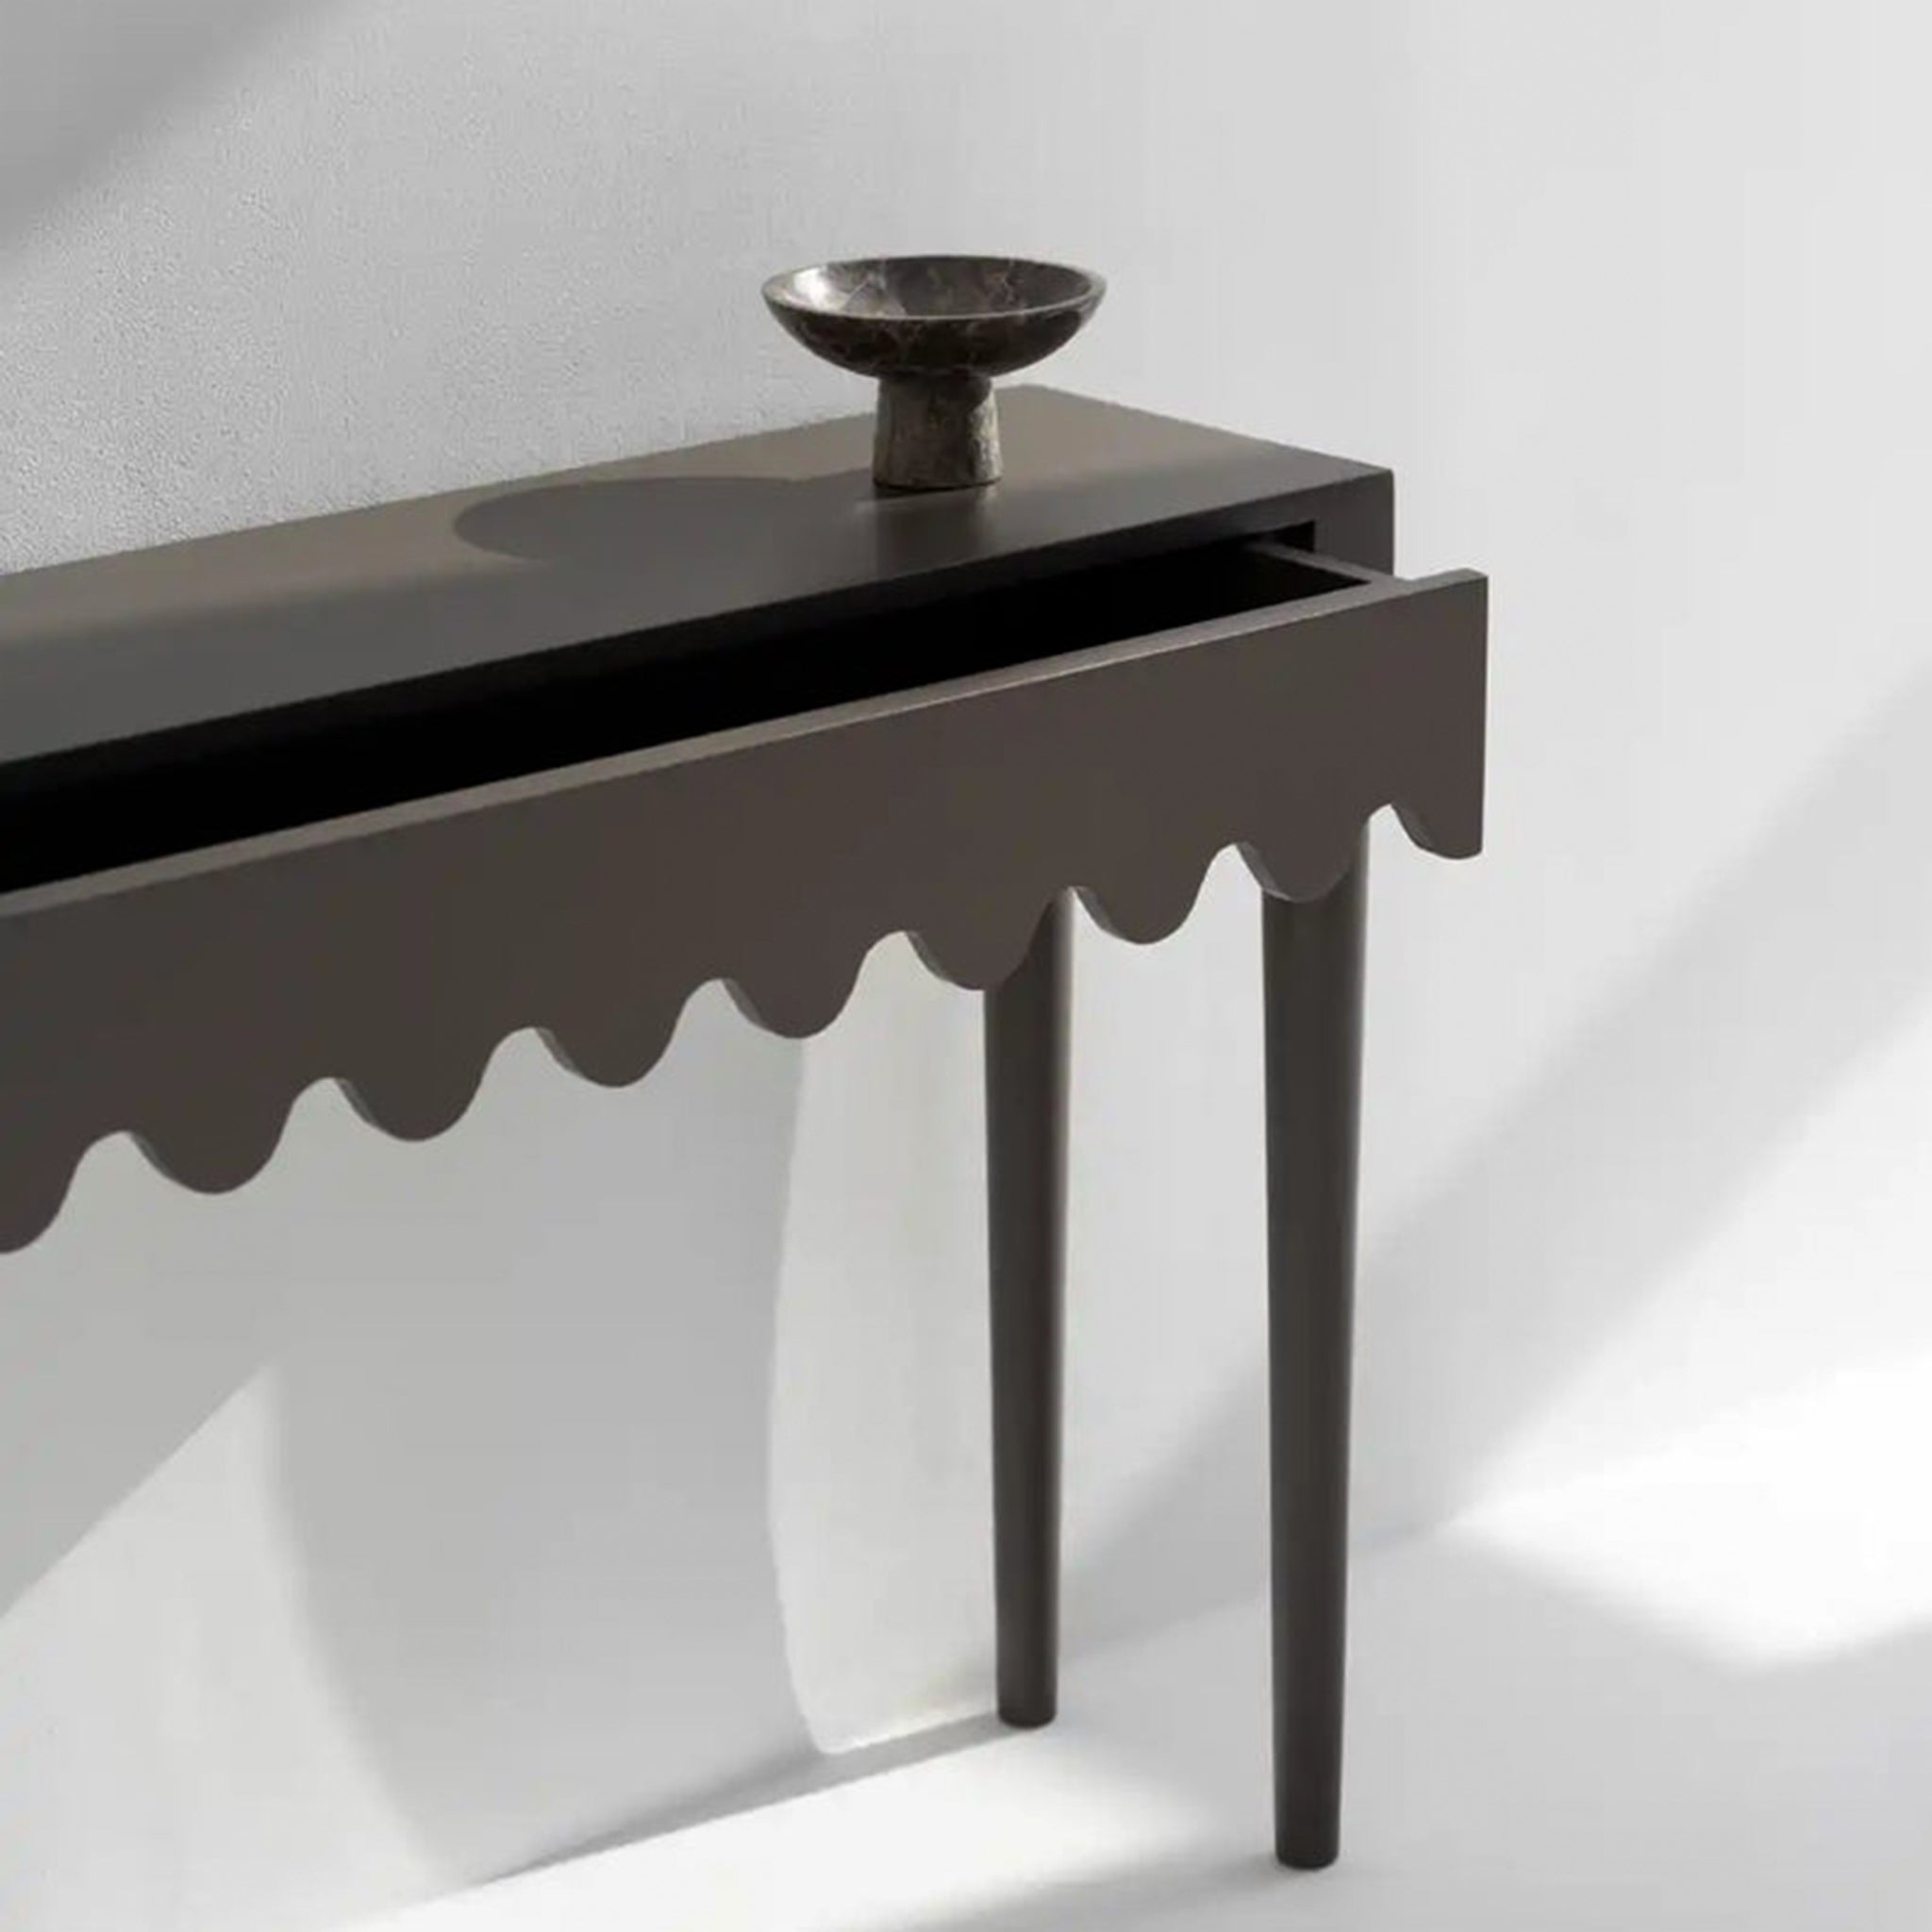 "Elegant black console table featuring a unique scalloped drawer for storage."